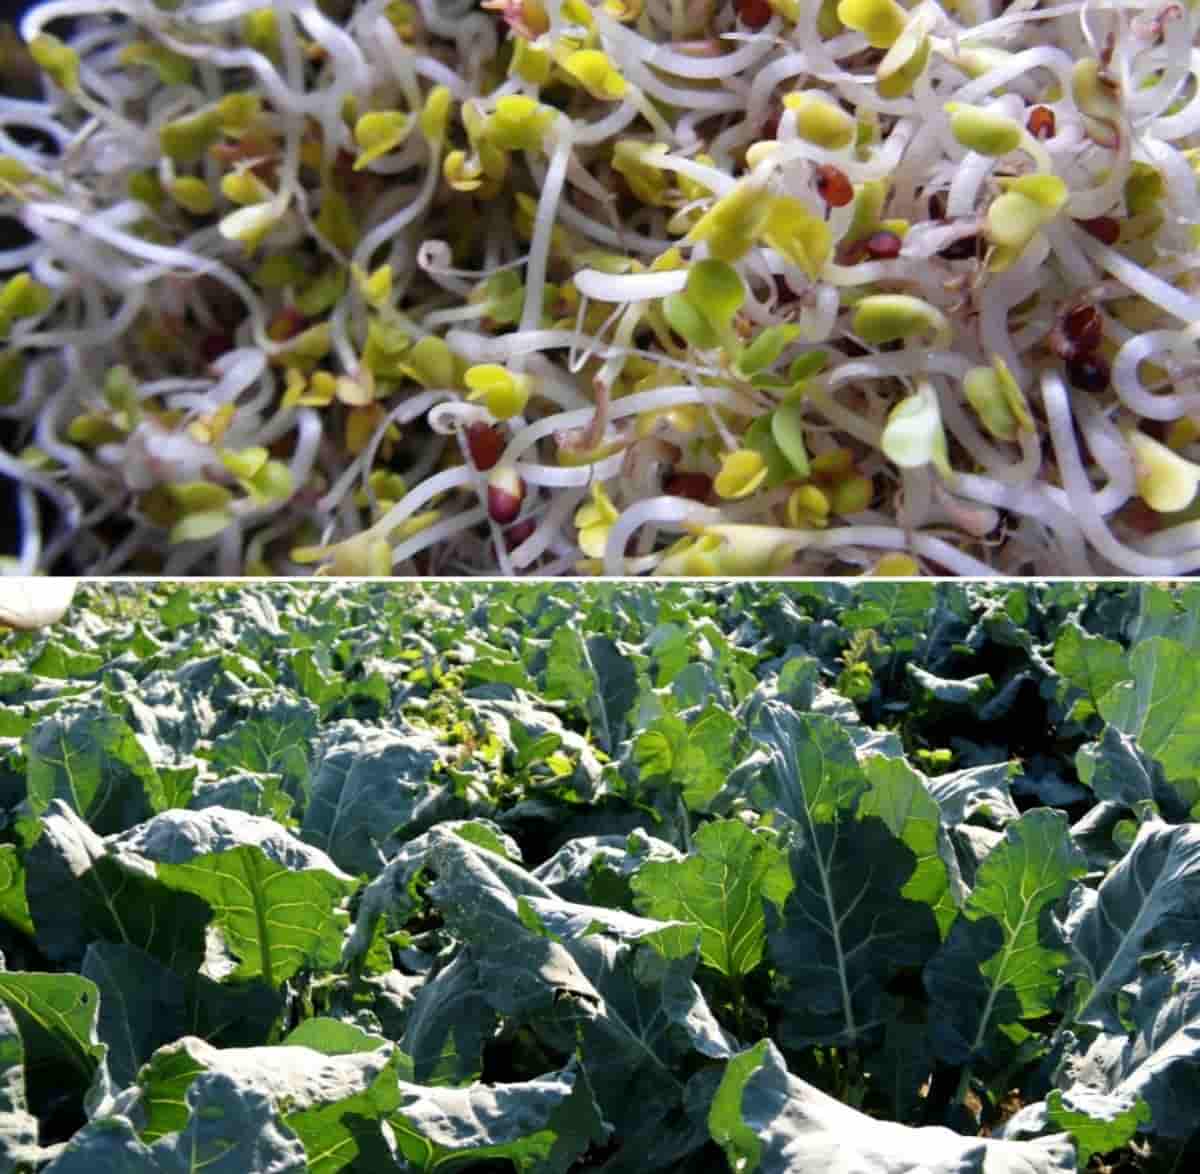 A guide to the cultivation of organic Broccoli.